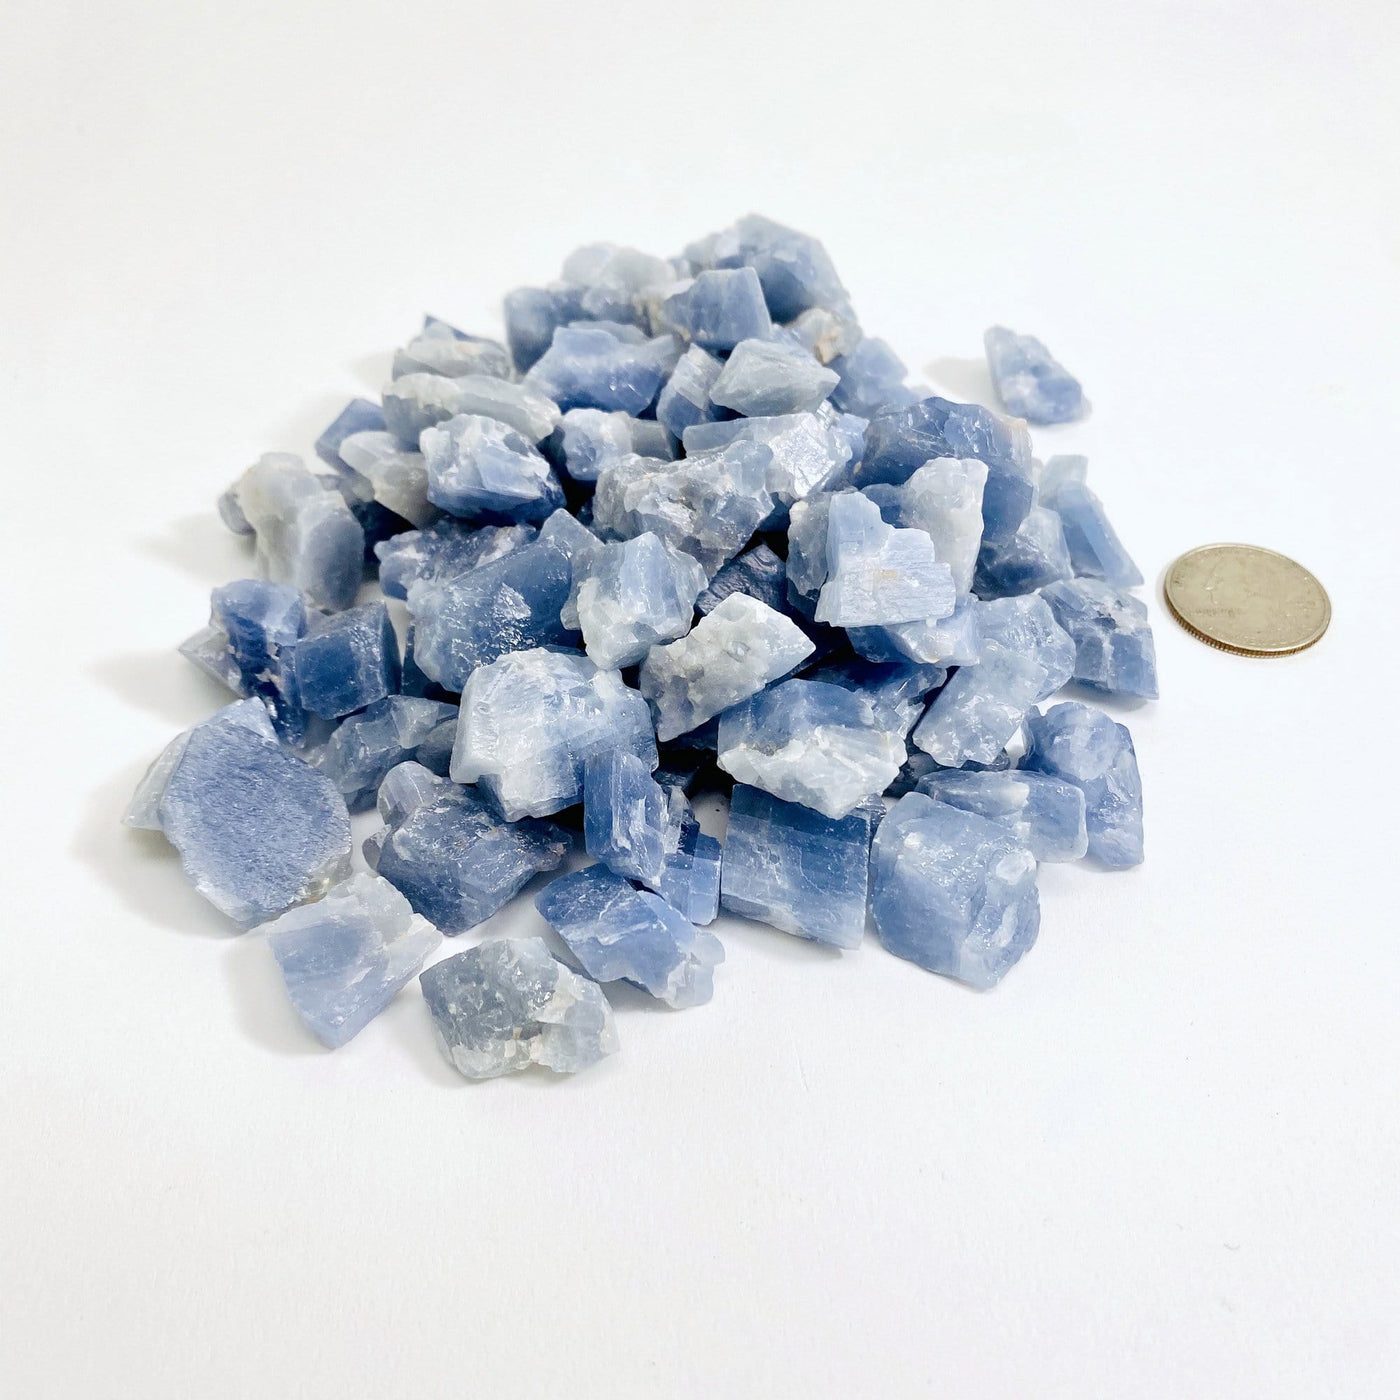 pile of blue calcite next to a quarter for size reference